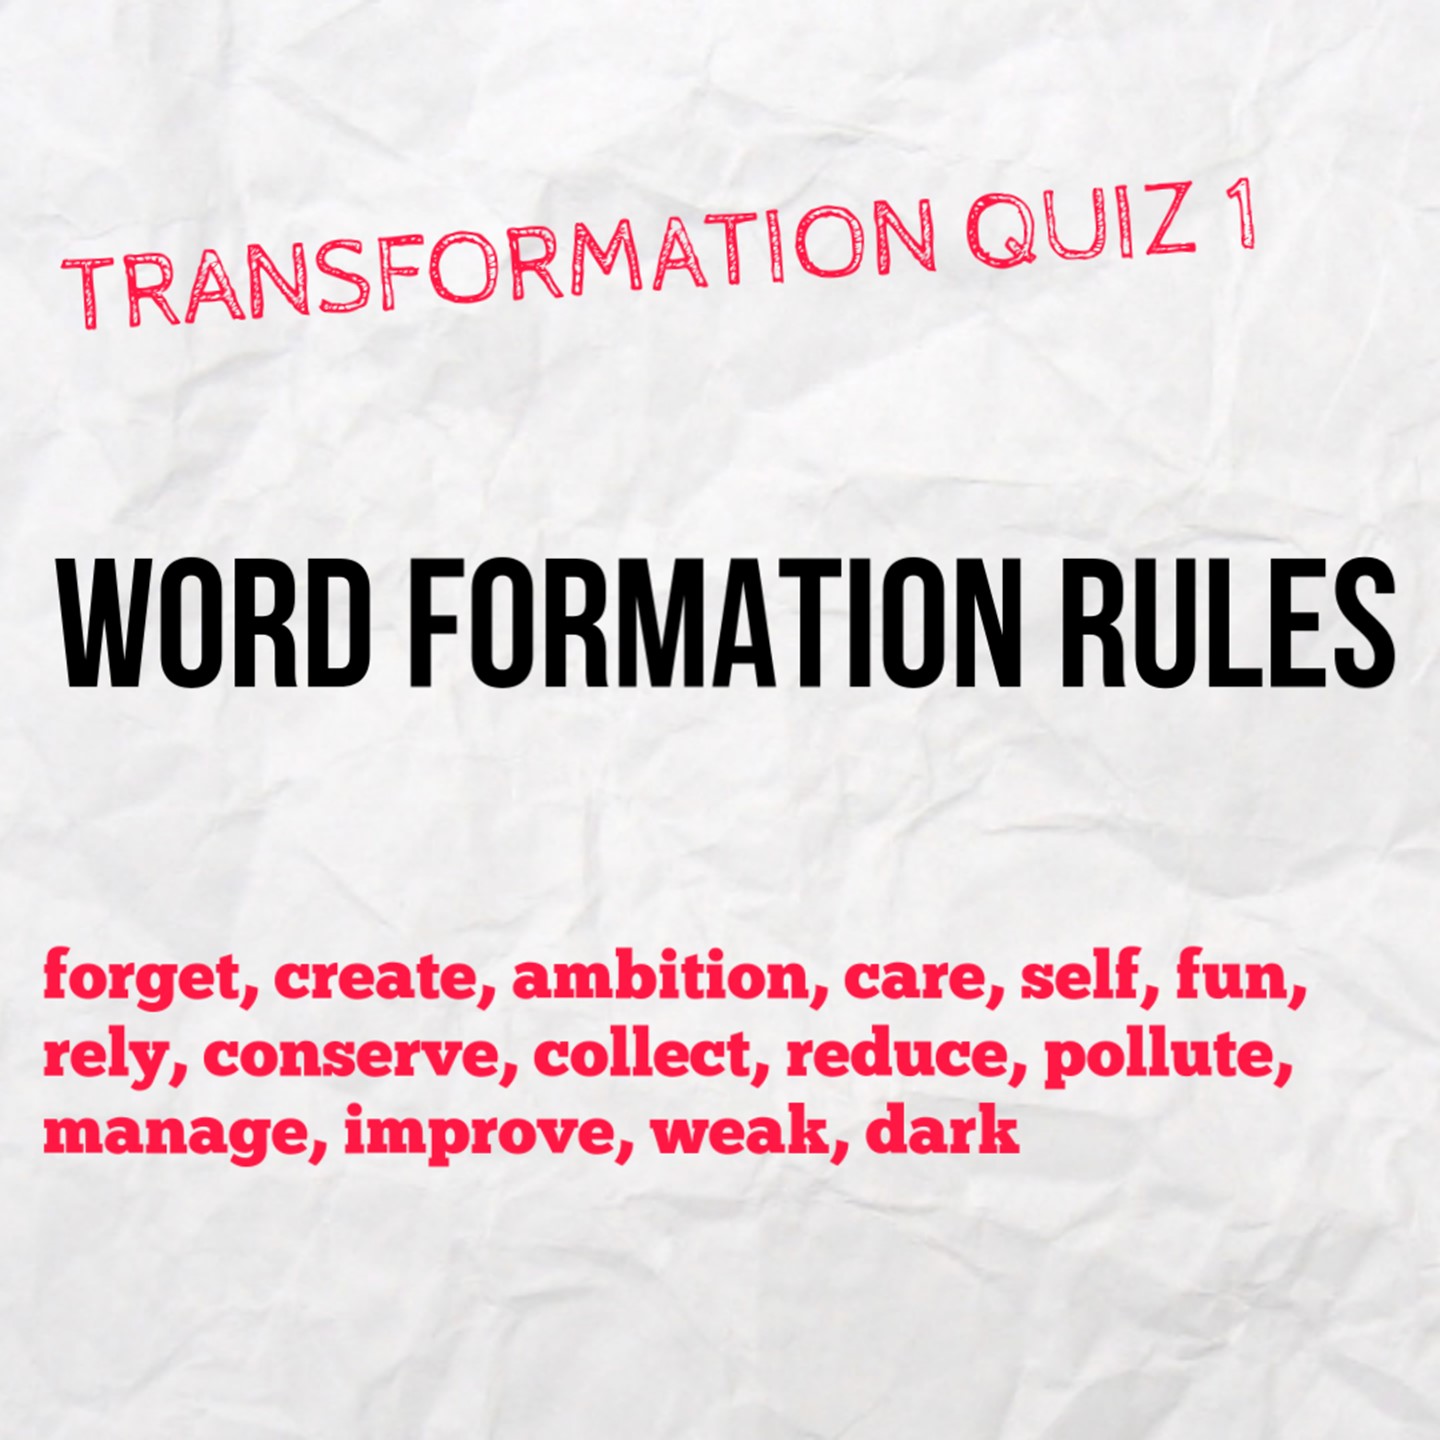 ebook-word-formation-rules-quiz-1-new-model-for-learning-english